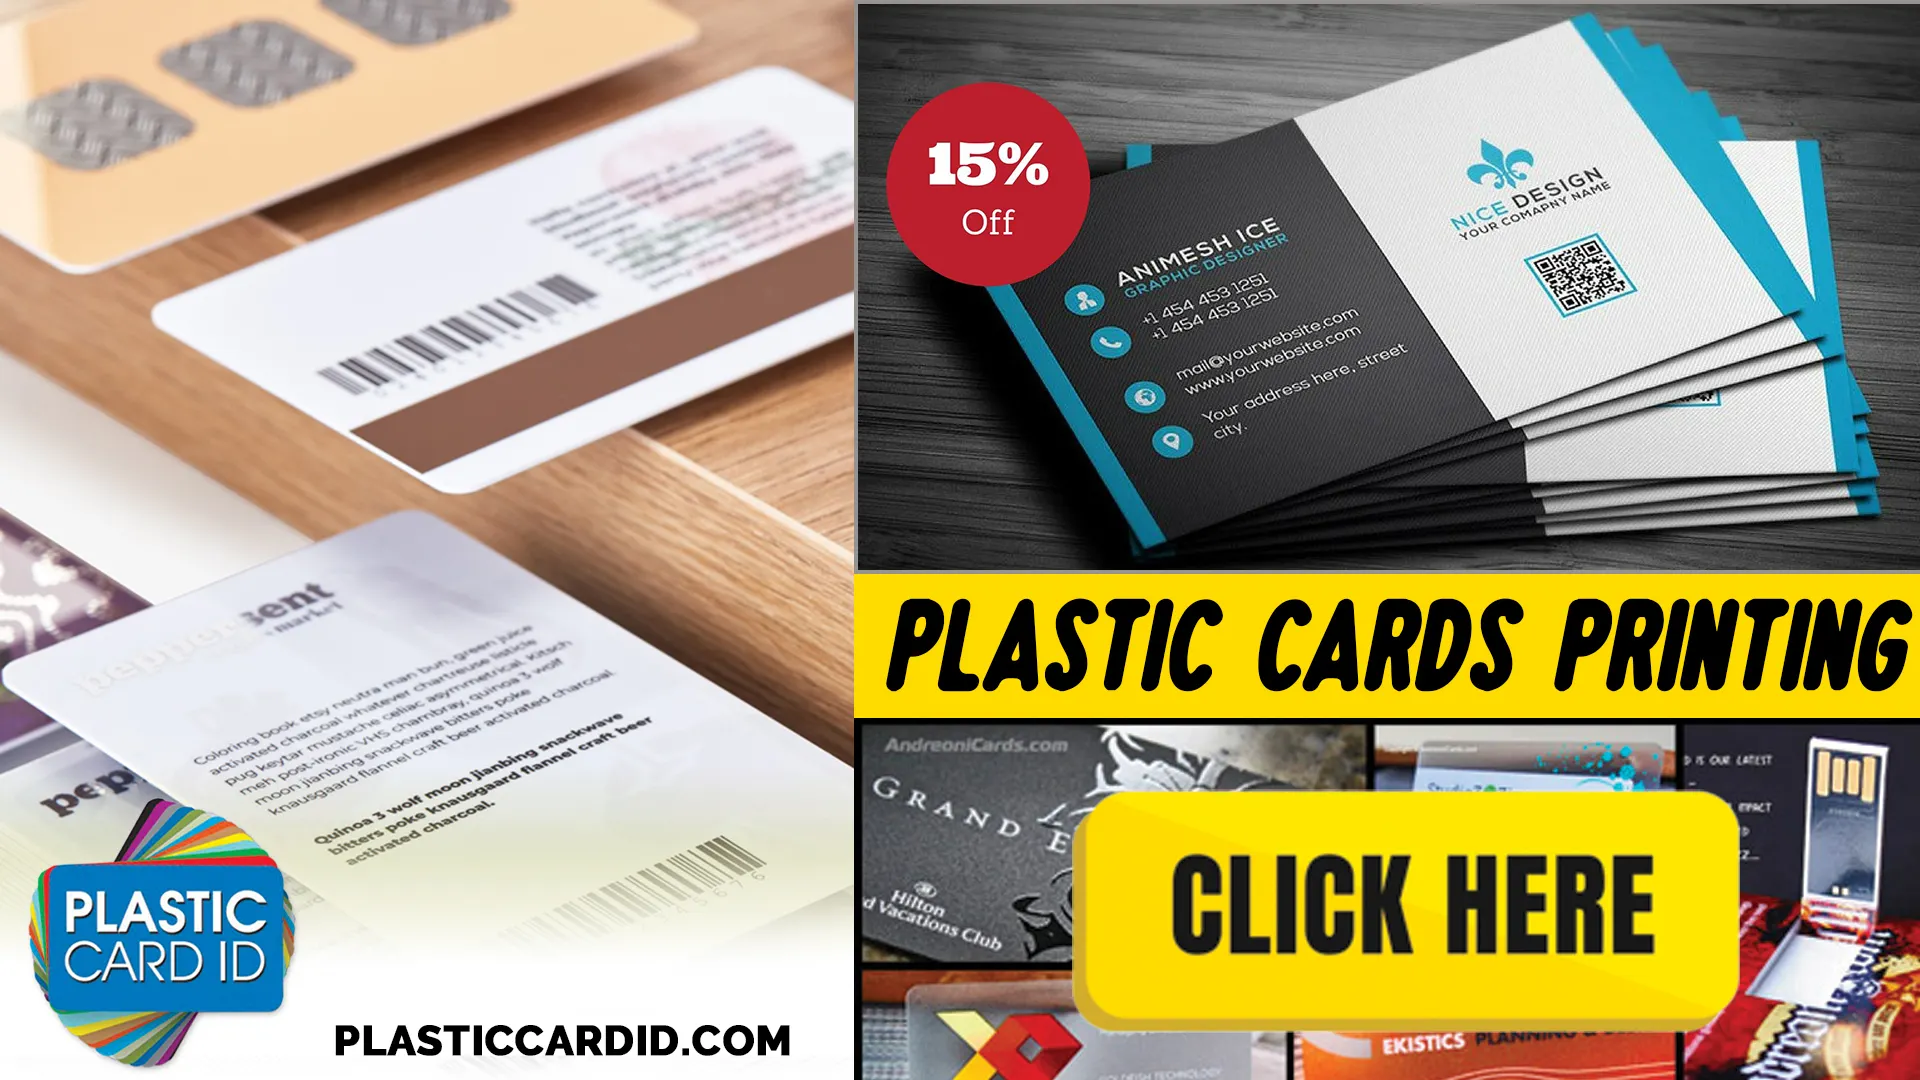 Reliable and Continuous Support from Plastic Card ID
